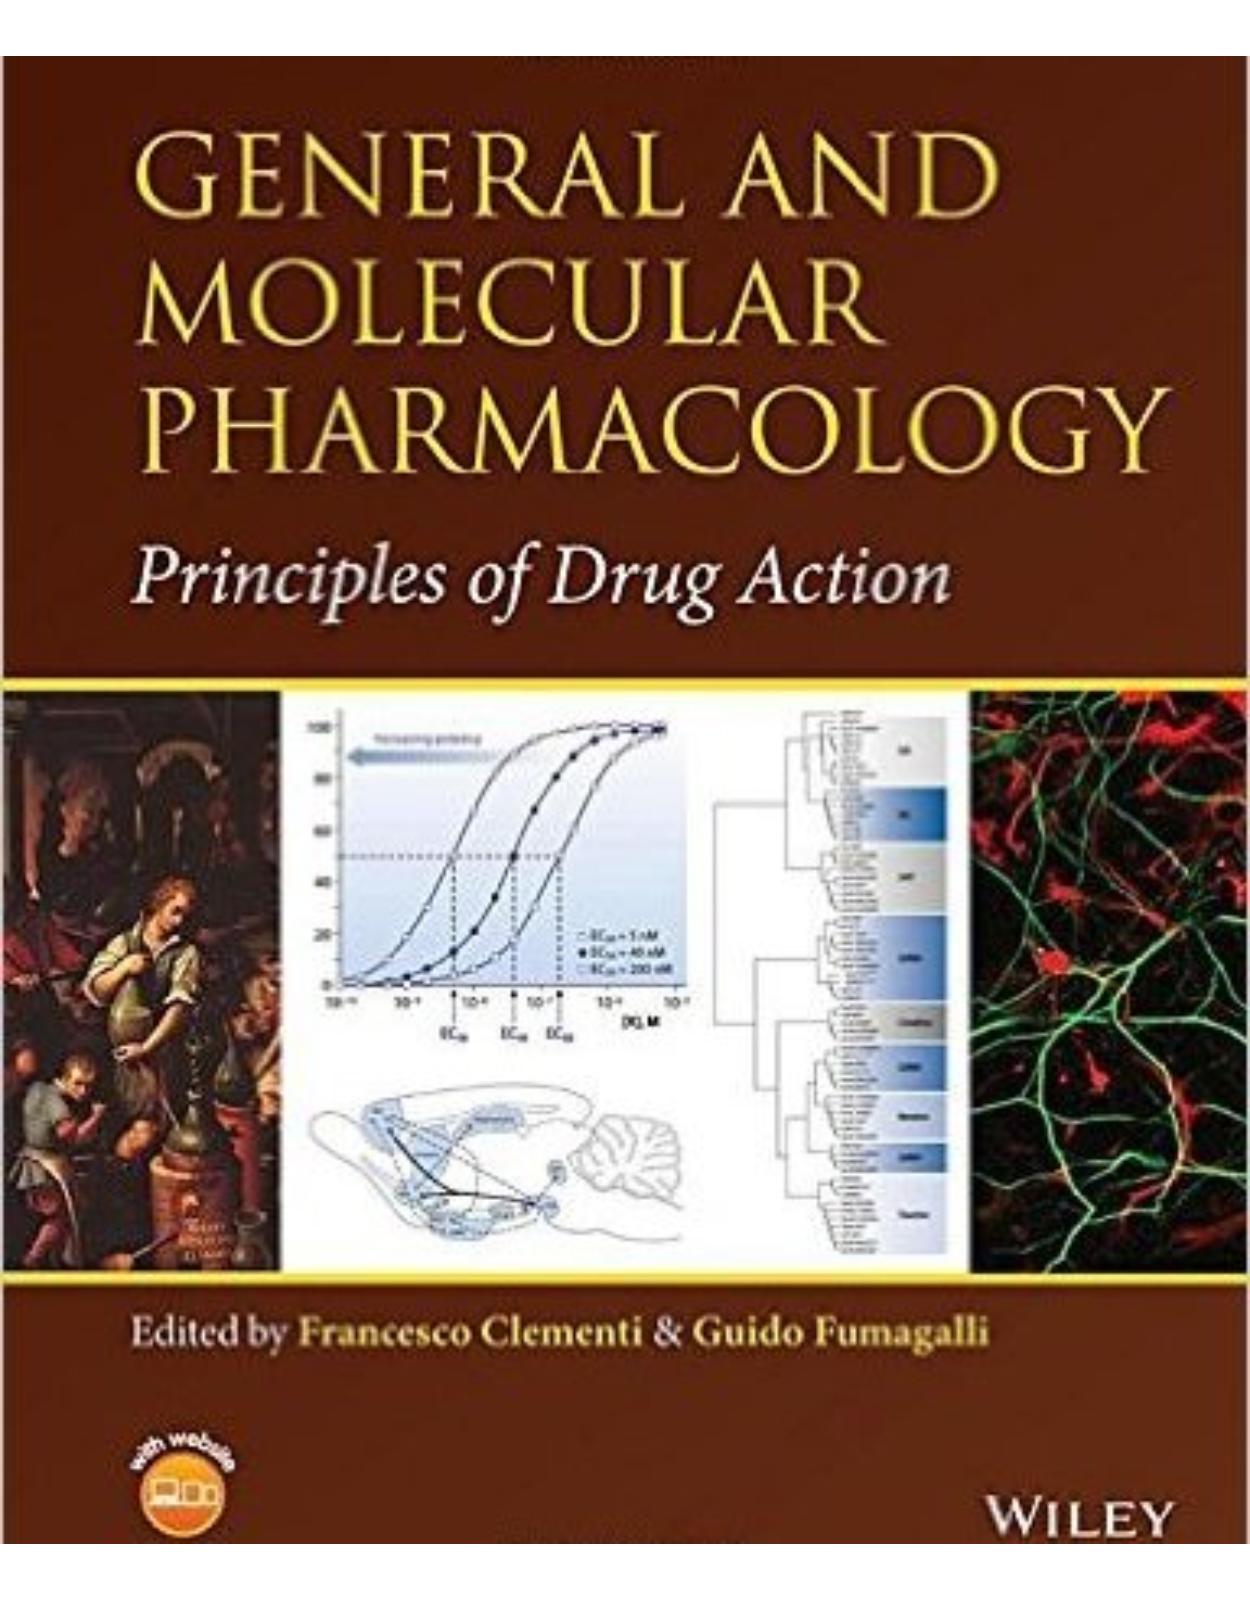 General and Molecular Pharmacology: Principles of Drug Action 1st Edition